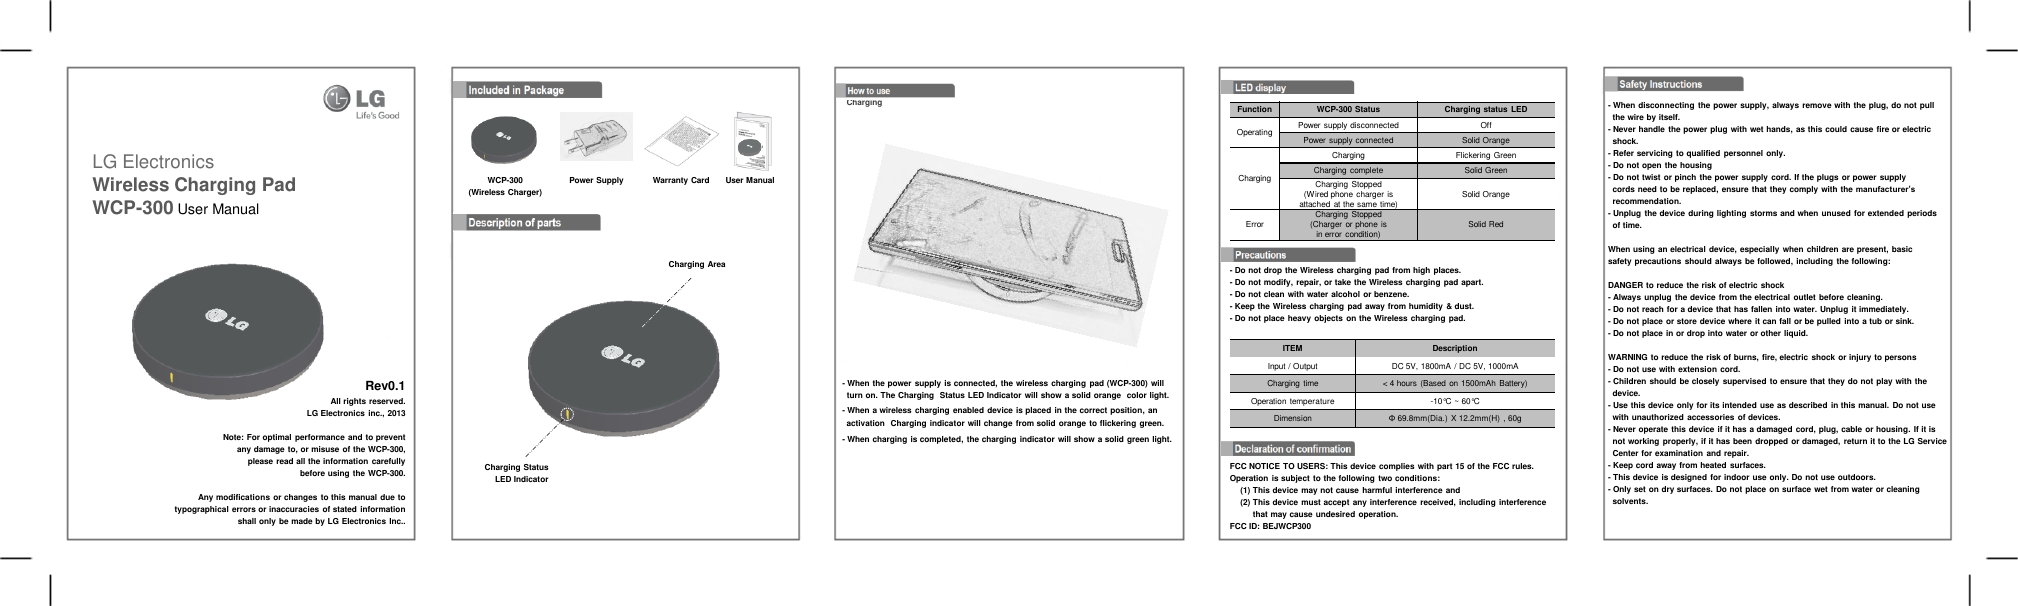 LG Electronics Wireless Charging Pad WCP-300 User Manual                   Rev0.1                 All rights reserved.               LG Electronics inc., 2013      Note: For optimal performance and to prevent       any damage to, or misuse of the WCP-300,           please read all the information carefully             before using the WCP-300.    Any modifications or changes to this manual due to typographical errors or inaccuracies  of stated information         shall only be made by LG Electronics Inc.. - Do not drop the Wireless charging pad from high places. - Do not modify, repair, or take the Wireless charging  pad apart. - Do not clean with water alcohol or benzene. - Keep the Wireless charging pad away from humidity &amp; dust. - Do not place heavy objects on the Wireless charging pad. Included in Package WCP-300 (Wireless Charger) Power Supply  Warranty Card  User Manual Description of parts FCC NOTICE TO USERS: This device complies with part 15 of the FCC rules. Operation is subject to the following  two conditions:    (1) This device may not cause harmful interference and    (2) This device must accept any interference  received, including  interference        that may cause undesired operation. FCC ID: BEJWCP300 - When disconnecting  the power supply, always remove with the plug, do not pull   the wire by itself. - Never handle the power plug with wet hands, as this could cause fire or electric    shock. - Refer servicing to qualified personnel only. - Do not open the housing - Do not twist or pinch the power supply cord. If the plugs or power supply   cords need to be replaced, ensure that they comply with the manufacturer’s   recommendation. - Unplug the device during lighting storms and when unused for extended periods   of time.  When using an electrical device, especially when children are present, basic safety precautions should  always be followed, including the following:  DANGER to reduce the risk of electric shock - Always unplug the device from the electrical outlet before cleaning. - Do not reach for a device that has fallen into water. Unplug it immediately. - Do not place or store device where it can fall or be pulled into a tub or sink. - Do not place in or drop into water or other liquid.  WARNING to reduce the risk of burns, fire, electric shock or injury to persons - Do not use with extension cord. - Children should be closely supervised  to ensure that they do not play with the   device. - Use this device only for its intended  use as described in this manual. Do not use   with unauthorized accessories of devices. - Never operate this device if it has a damaged cord, plug, cable or housing.  If it is   not working properly, if it has been dropped or damaged,  return it to the LG Service   Center for examination and repair. - Keep cord away from heated surfaces. - This device is designed for indoor use only. Do not use outdoors. - Only set on dry surfaces. Do not place on surface wet from water or cleaning   solvents. Safety Instructions LED display - When the power supply is connected,  the wireless charging pad (WCP-300) will    turn on. The Charging  Status LED Indicator will show a solid orange  color light. - When a wireless charging enabled device is placed in the correct position, an   activation  Charging indicator will change from solid orange to flickering green. - When charging is completed,  the charging indicator  will show a solid green light.  How to use Charging Charging Area Charging Status LED Indicator ITEM Description Input / Output DC 5V, 1800mA / DC 5V, 1000mA Charging time &lt; 4 hours (Based on 1500mAh Battery) Operation temperature -10°C ~ 60°C Dimension Φ 69.8mm(Dia.)  X 12.2mm(H) , 60g Function WCP-300 Status Charging status  LED Operating Power supply disconnected Off Power supply connected Solid Orange Charging Charging Flickering Green Charging complete Solid Green Charging Stopped (Wired phone charger is attached at the same time) Solid Orange Error Charging Stopped (Charger or phone is in error condition) Solid Red 